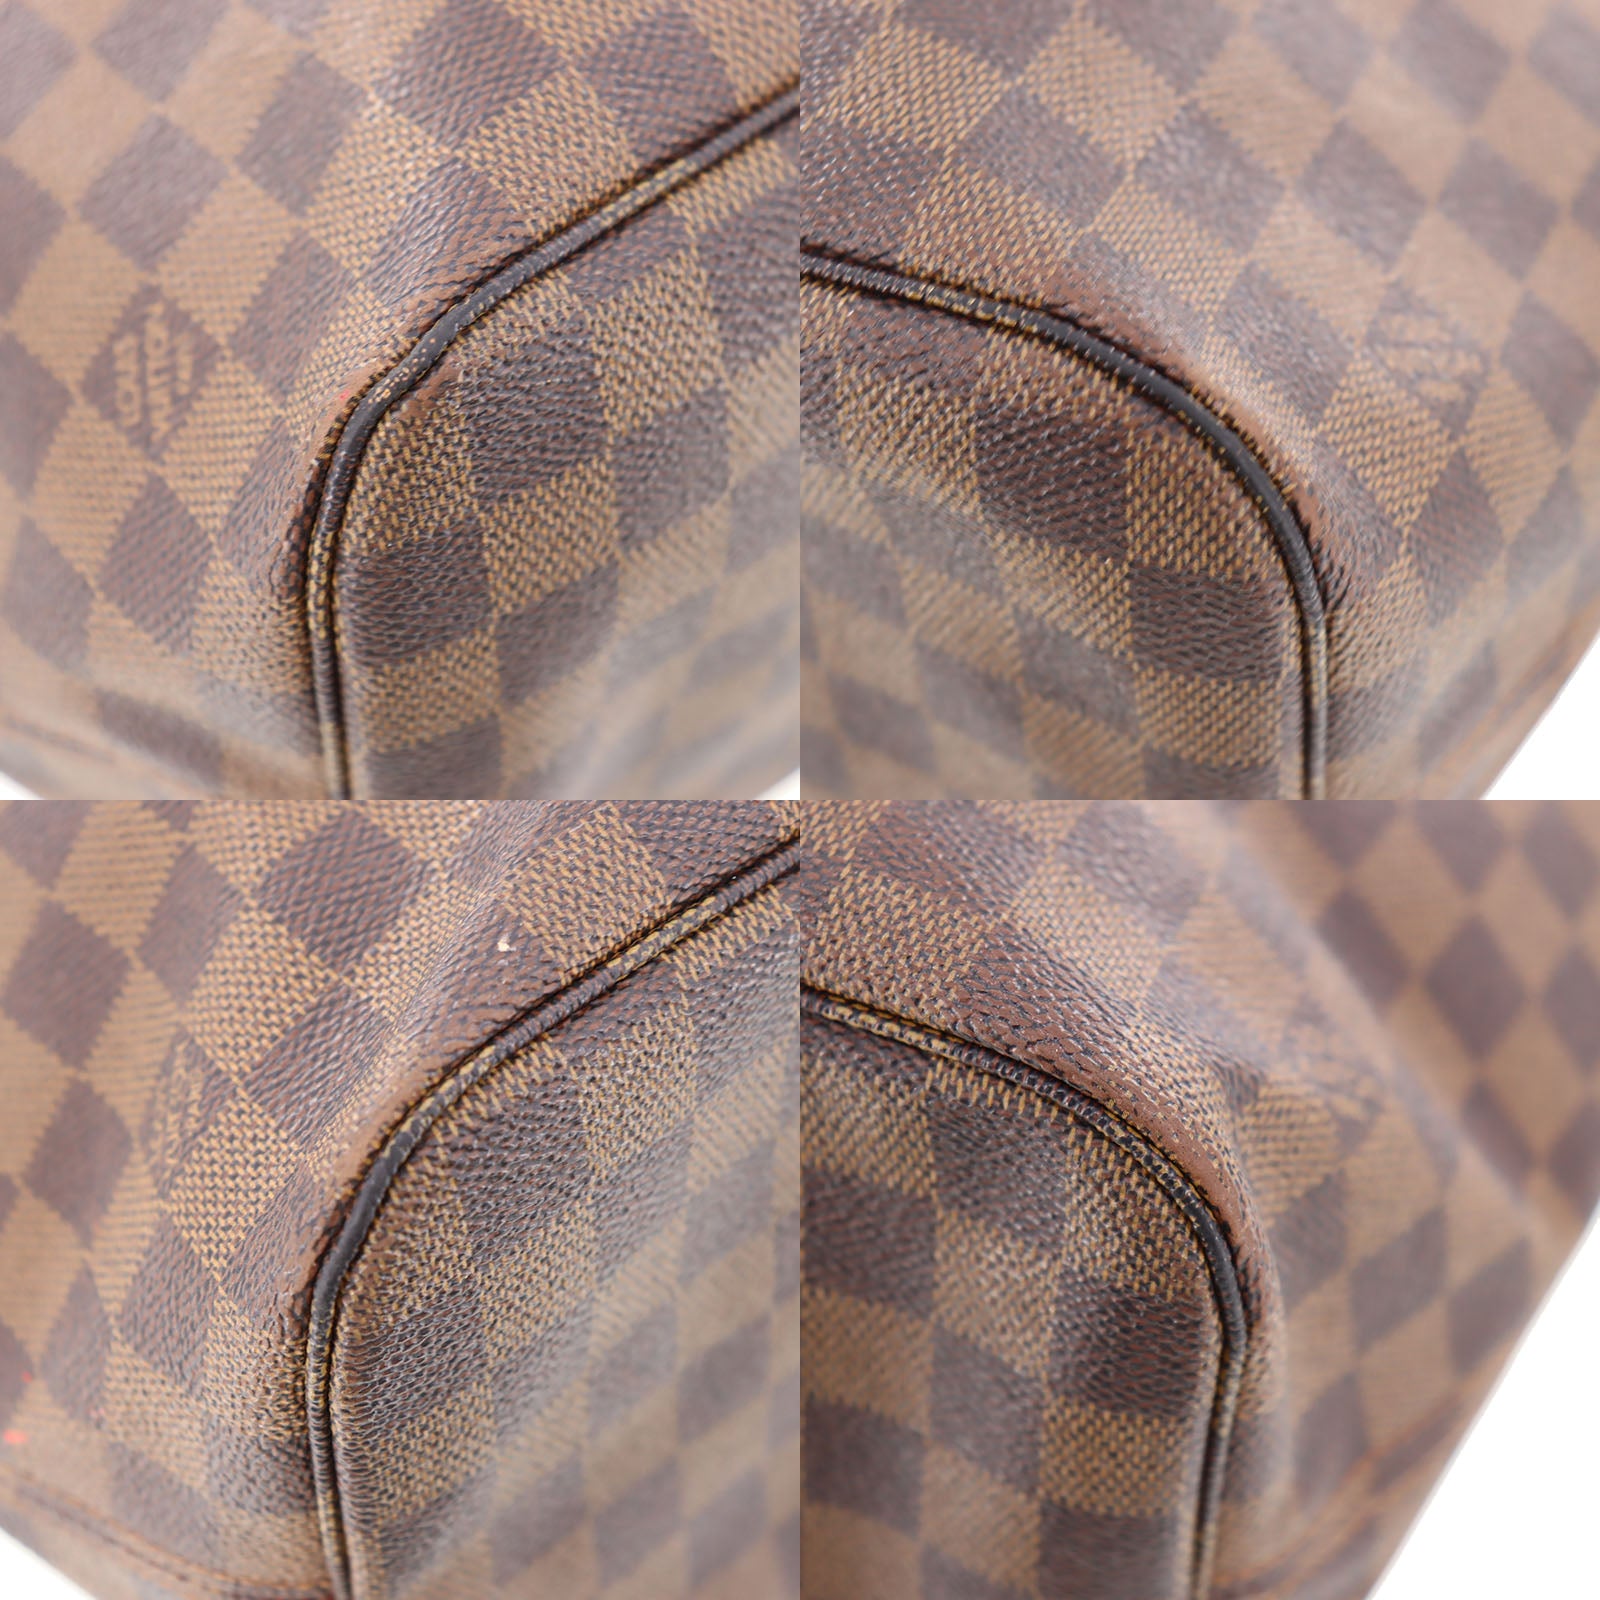 Neverfull leather tote Louis Vuitton Brown in Leather - 37974798